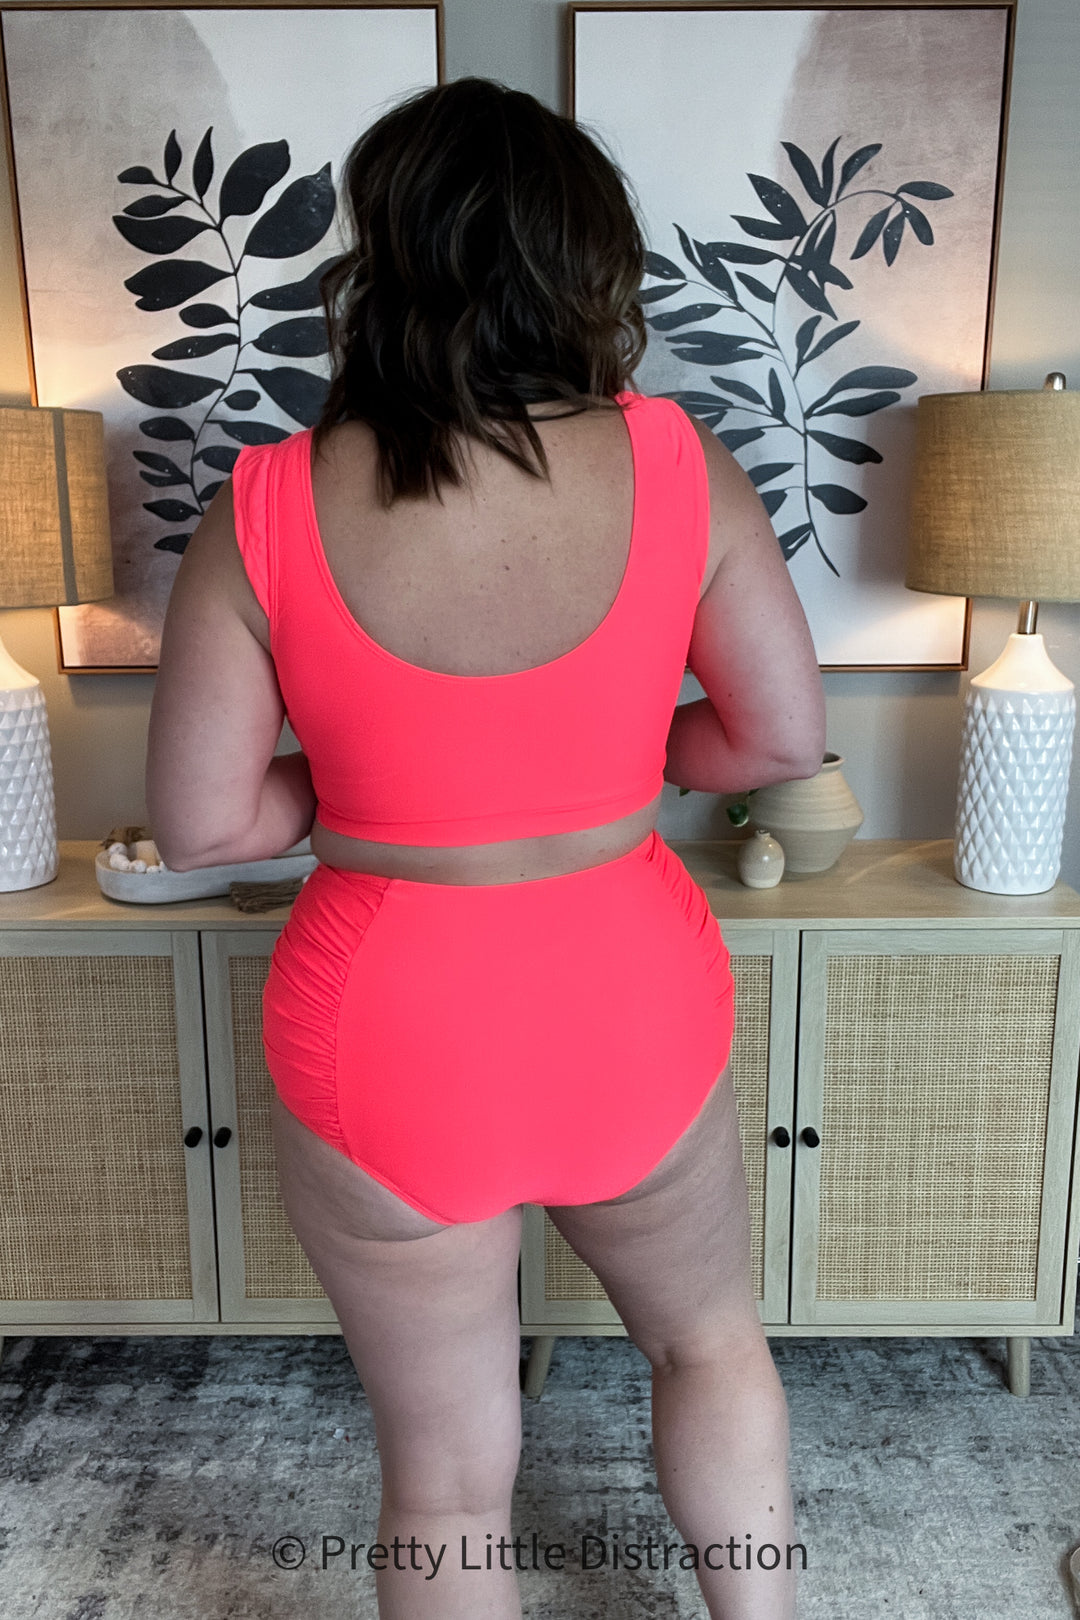 Sanibel Crop Swim Top and Ruched Bottoms Set in Coral